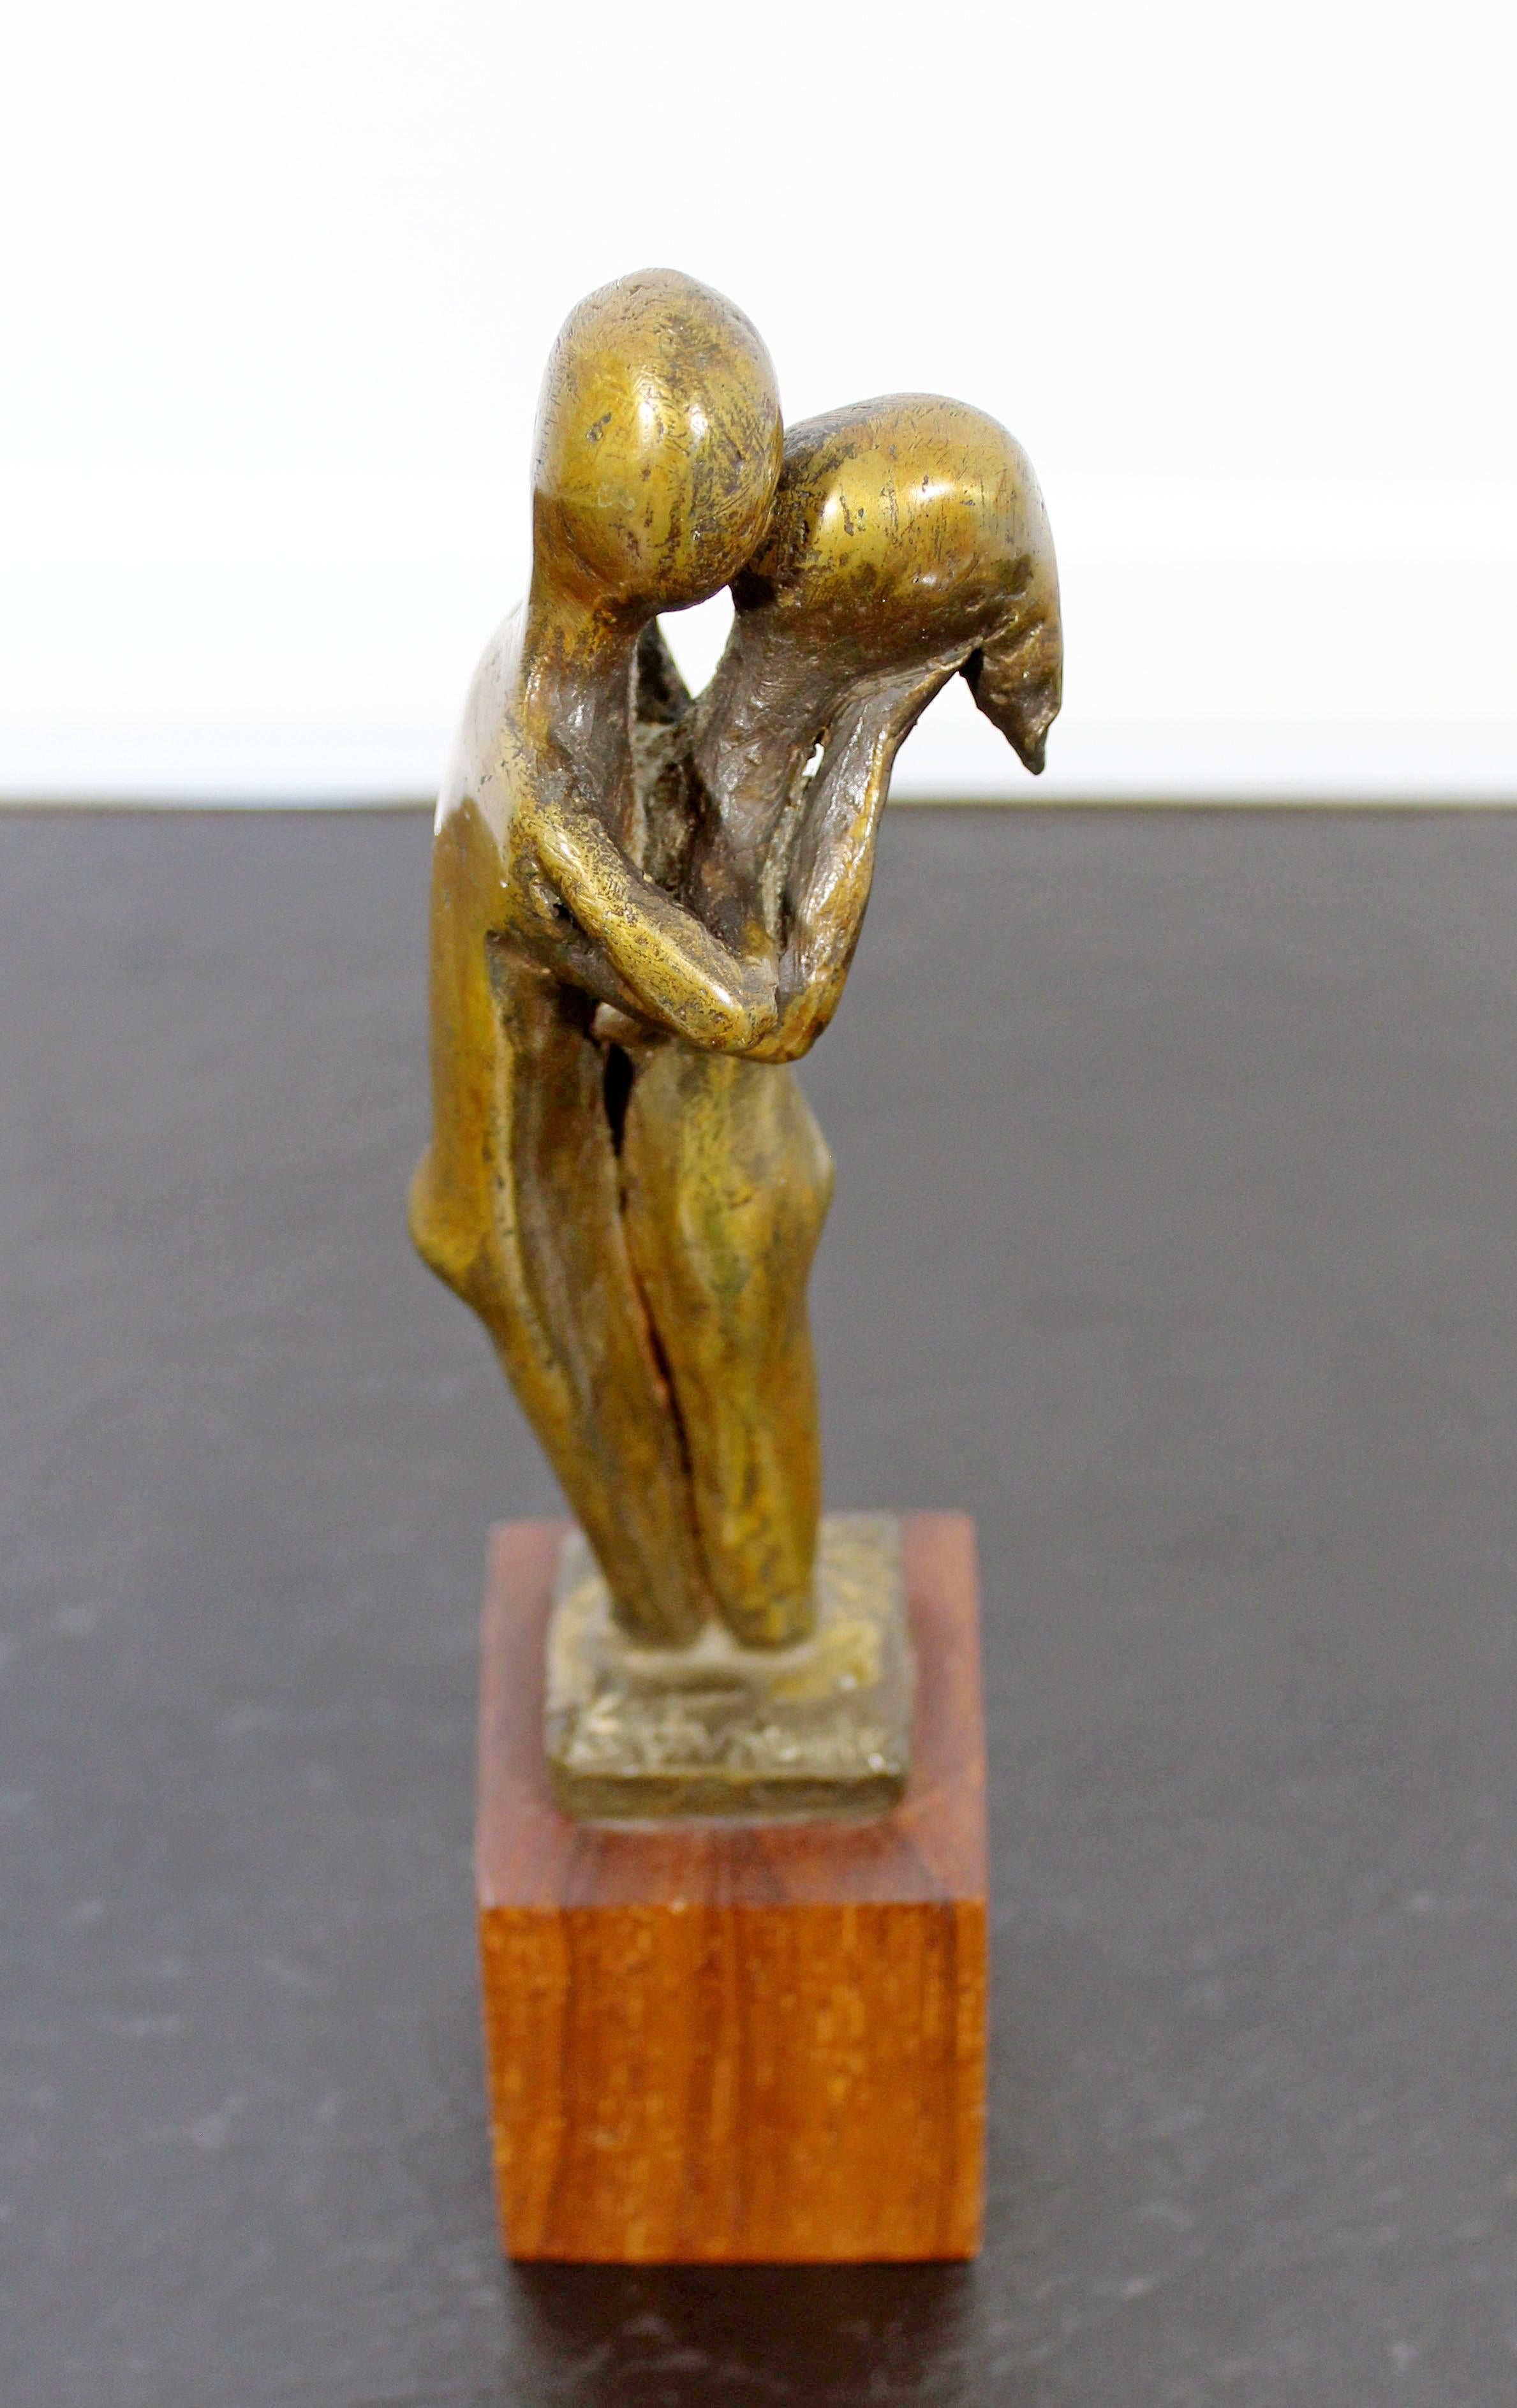 For your consideration is a sweet art sculpture of a couple kissing, made of bronze on a wood base, signed by Arthur Schneider, circa 1970s. In excellent condition. The dimensions are 2